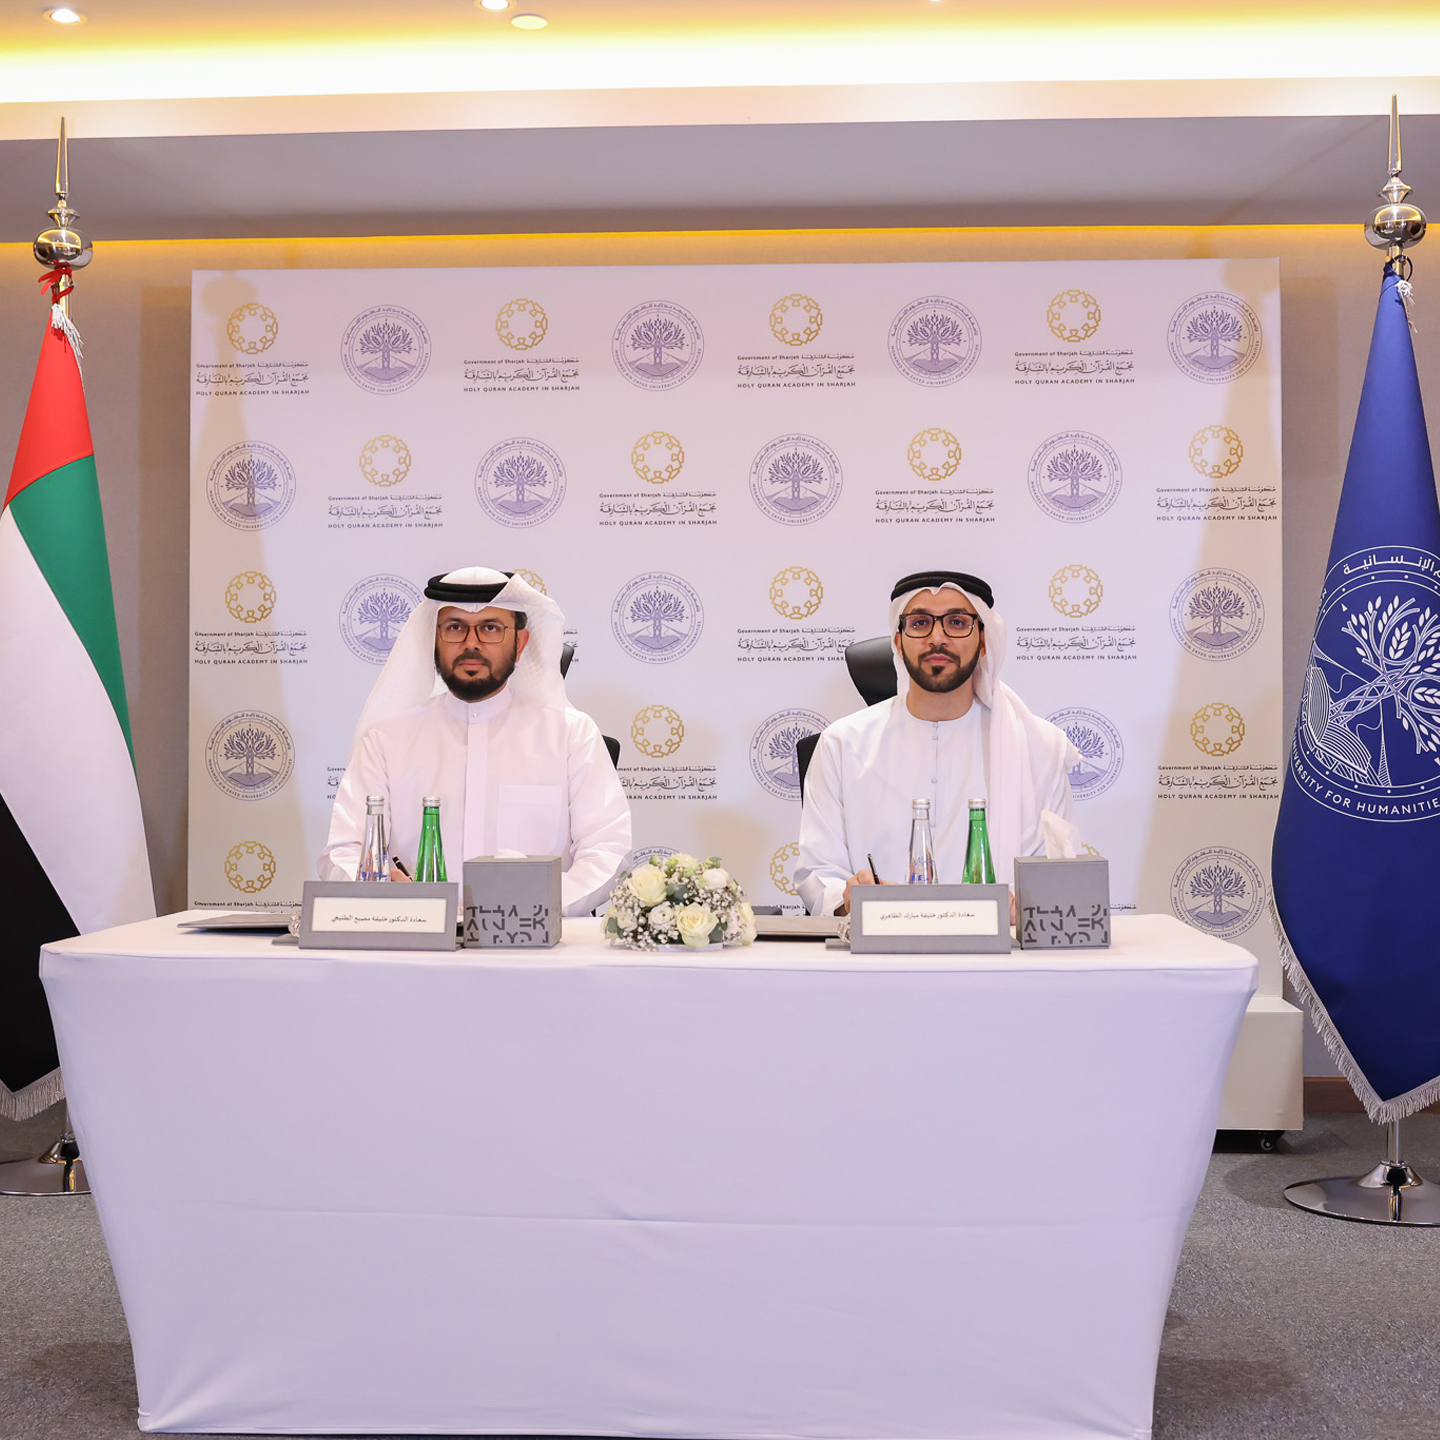  Mohamed bin Zayed University for Humanities partners with Holy Qur’an Academy in Sharjah